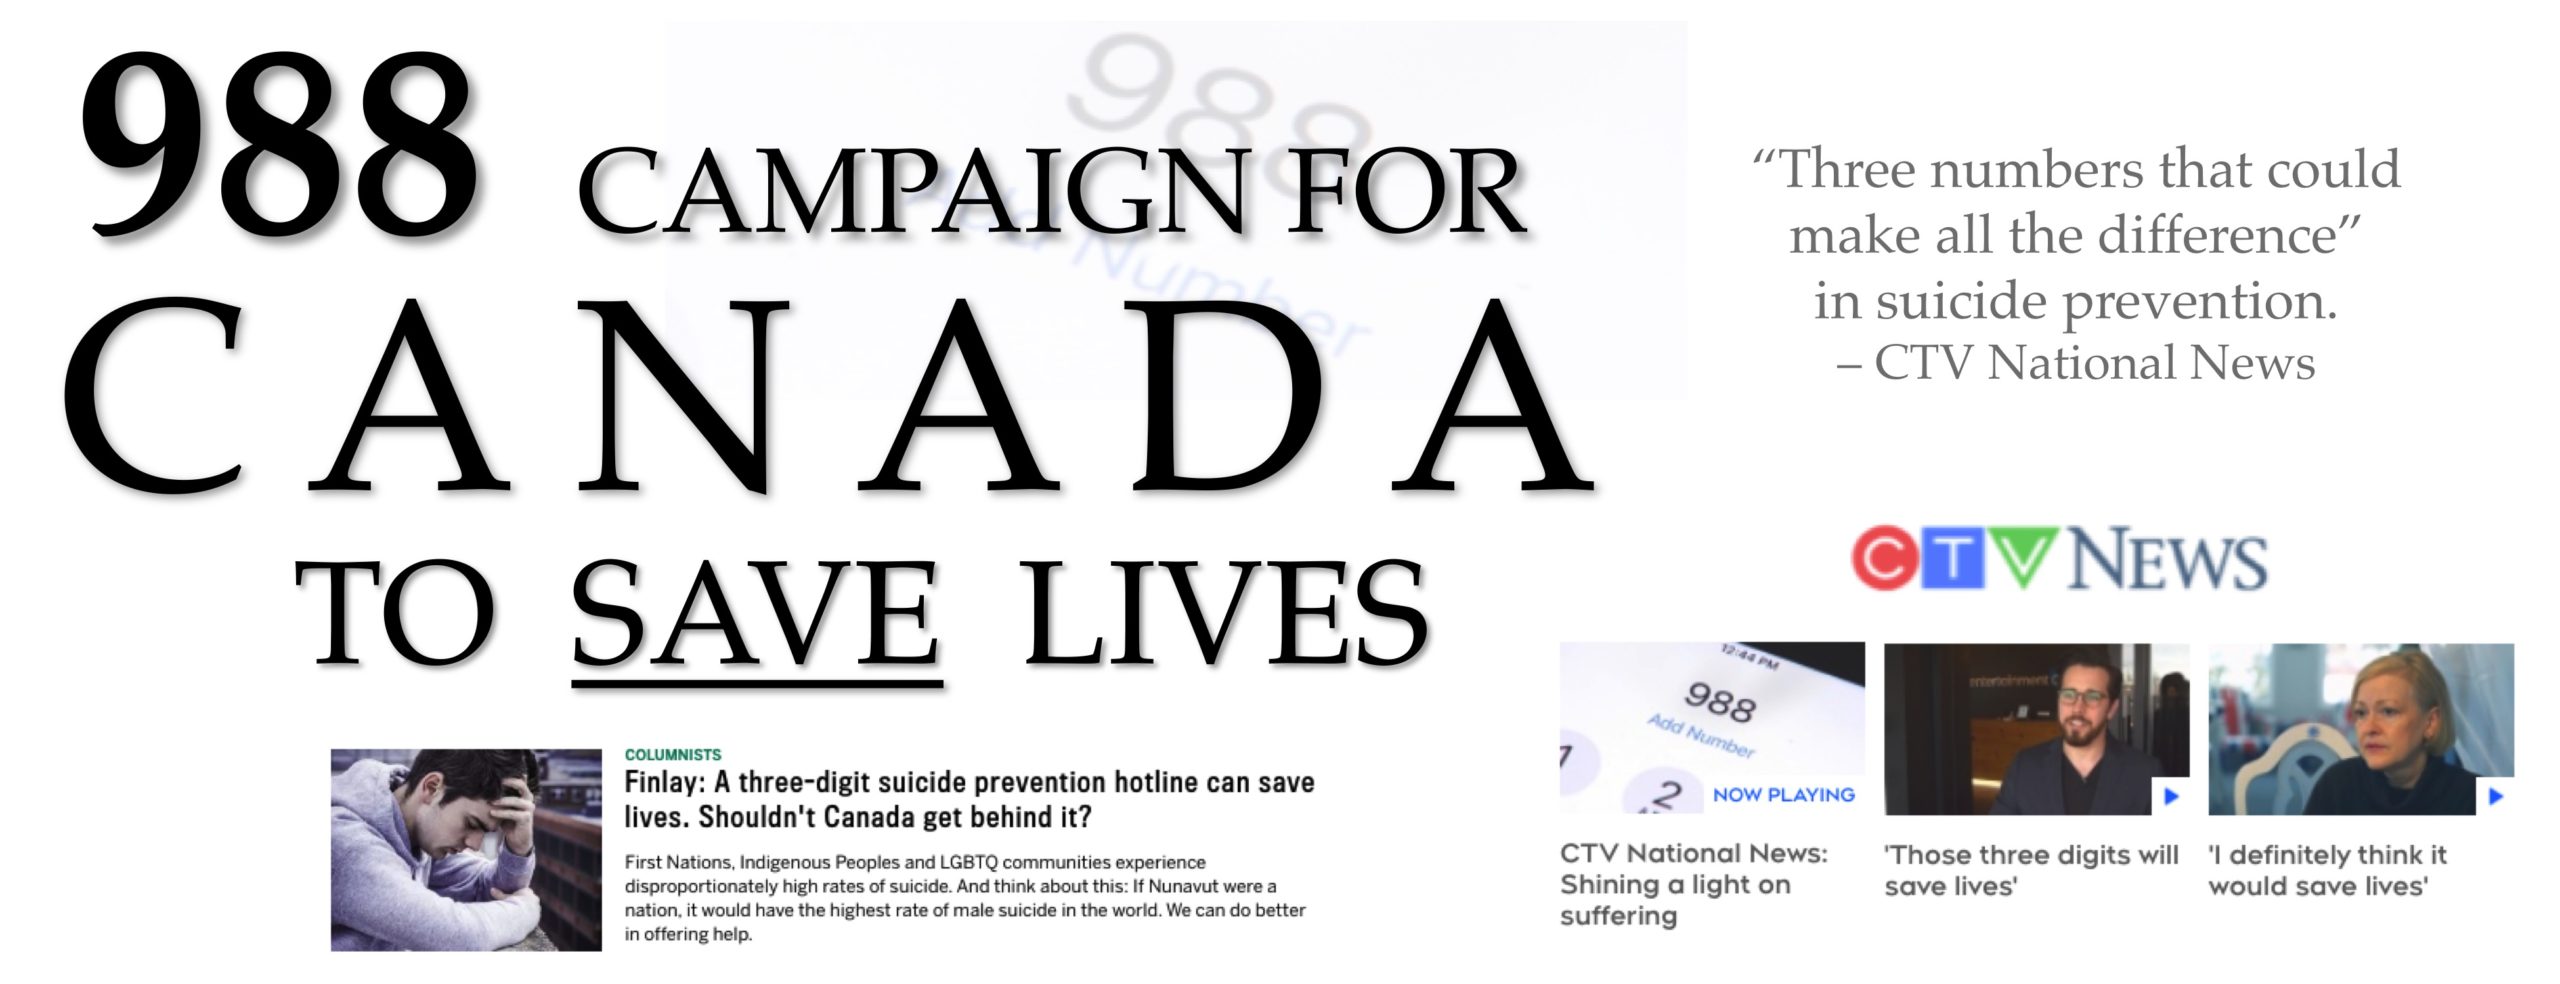 The 988 Campaign to Save Lives